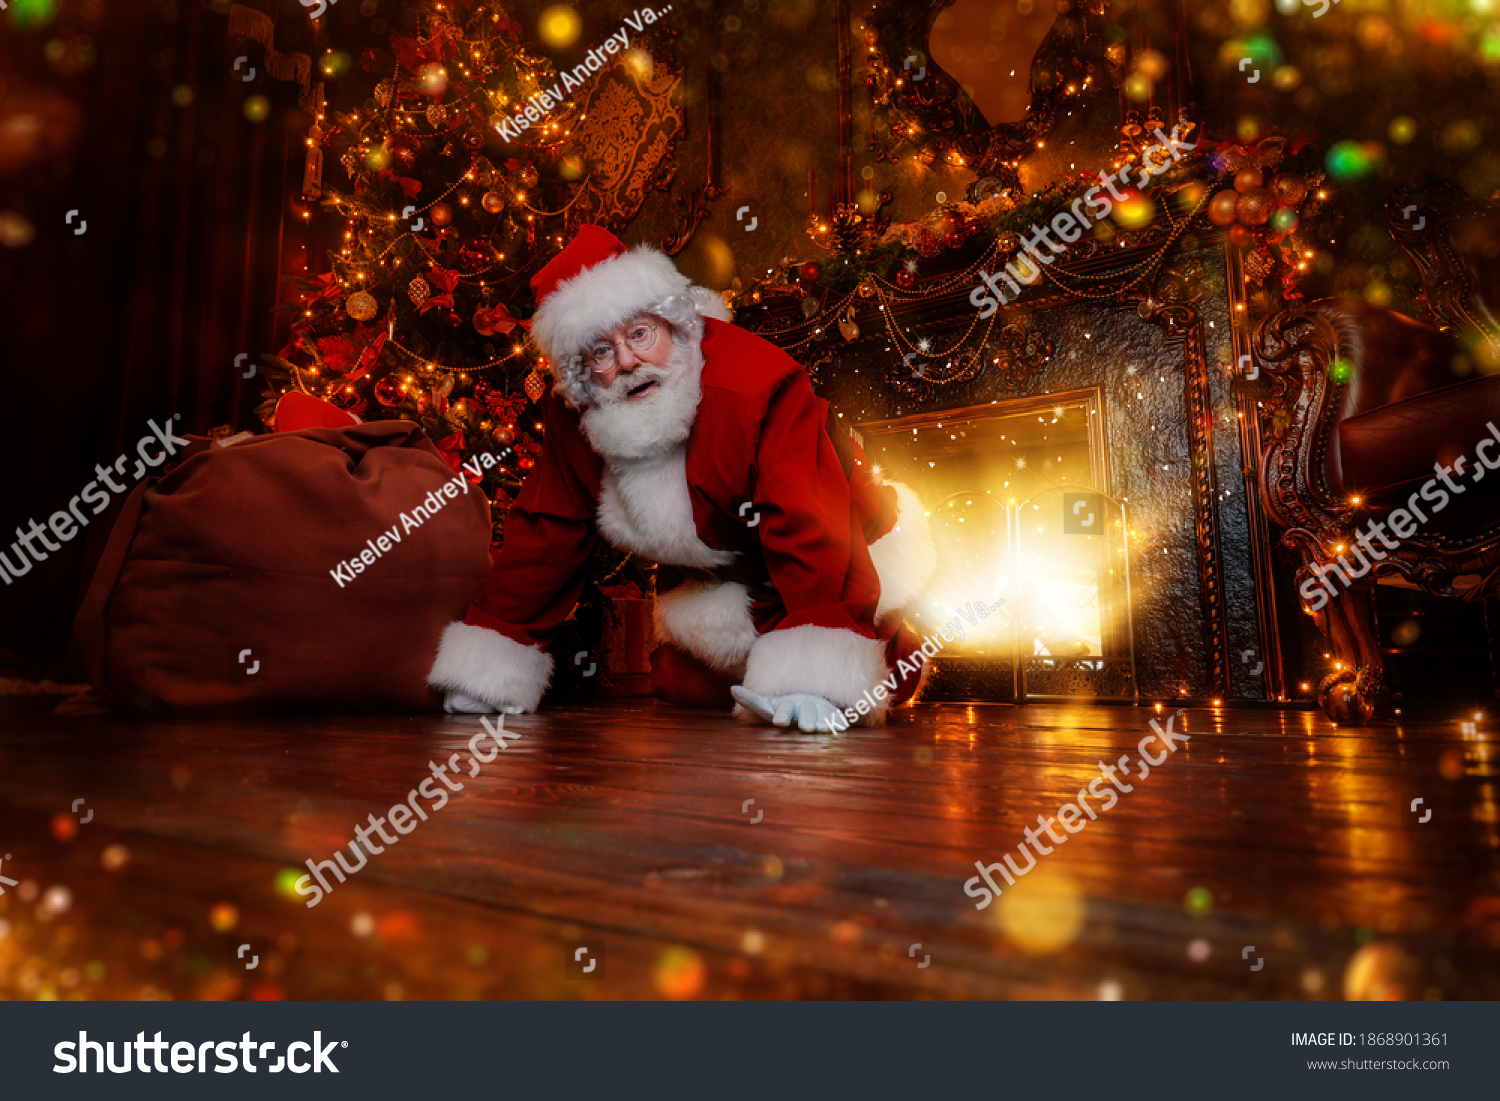 Jolly Santa Claus sneaked into the house through the fireplace with a bag of gifts. Beautiful home decoration. Merry Christmas and Happy New Year! #1868901361